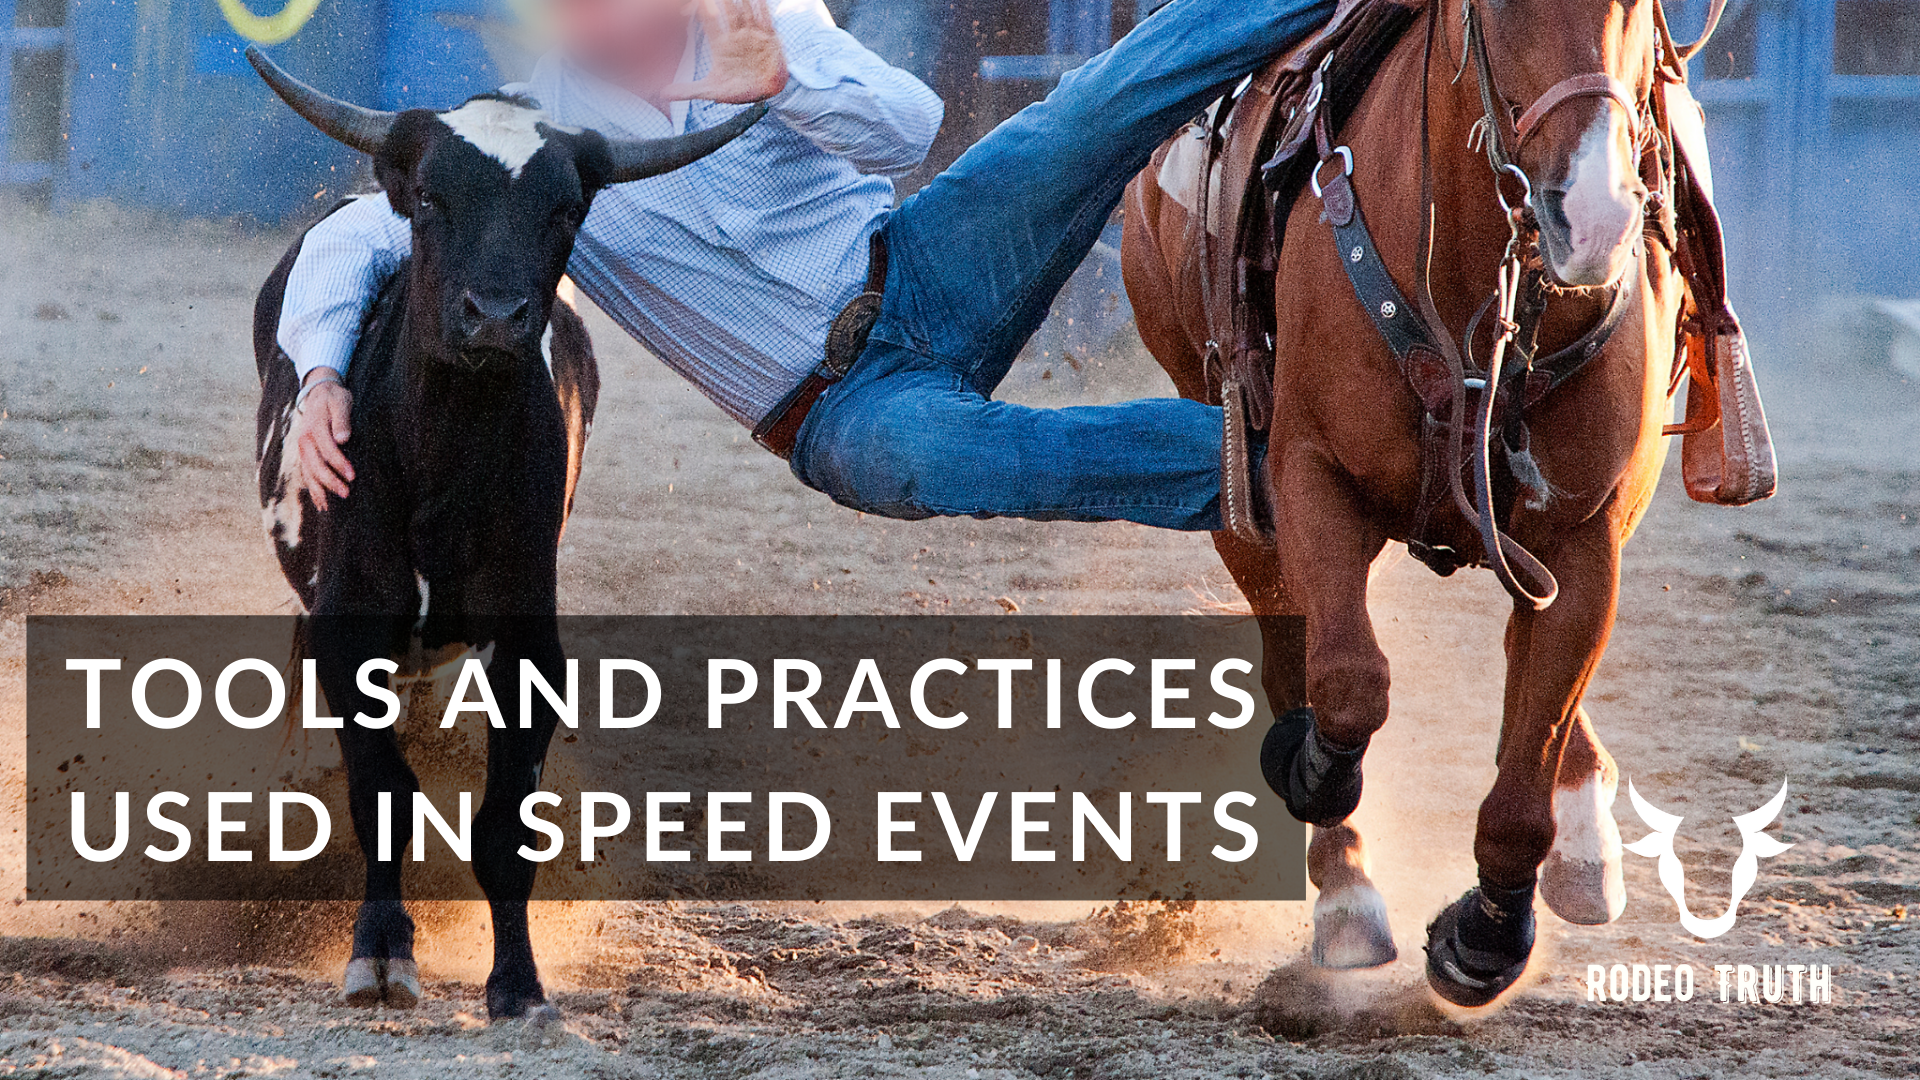 A rider jumps on the back of a startled steer during a steer wrestling rodeo event; a text overlay reads "Tools and practices used in speed events"